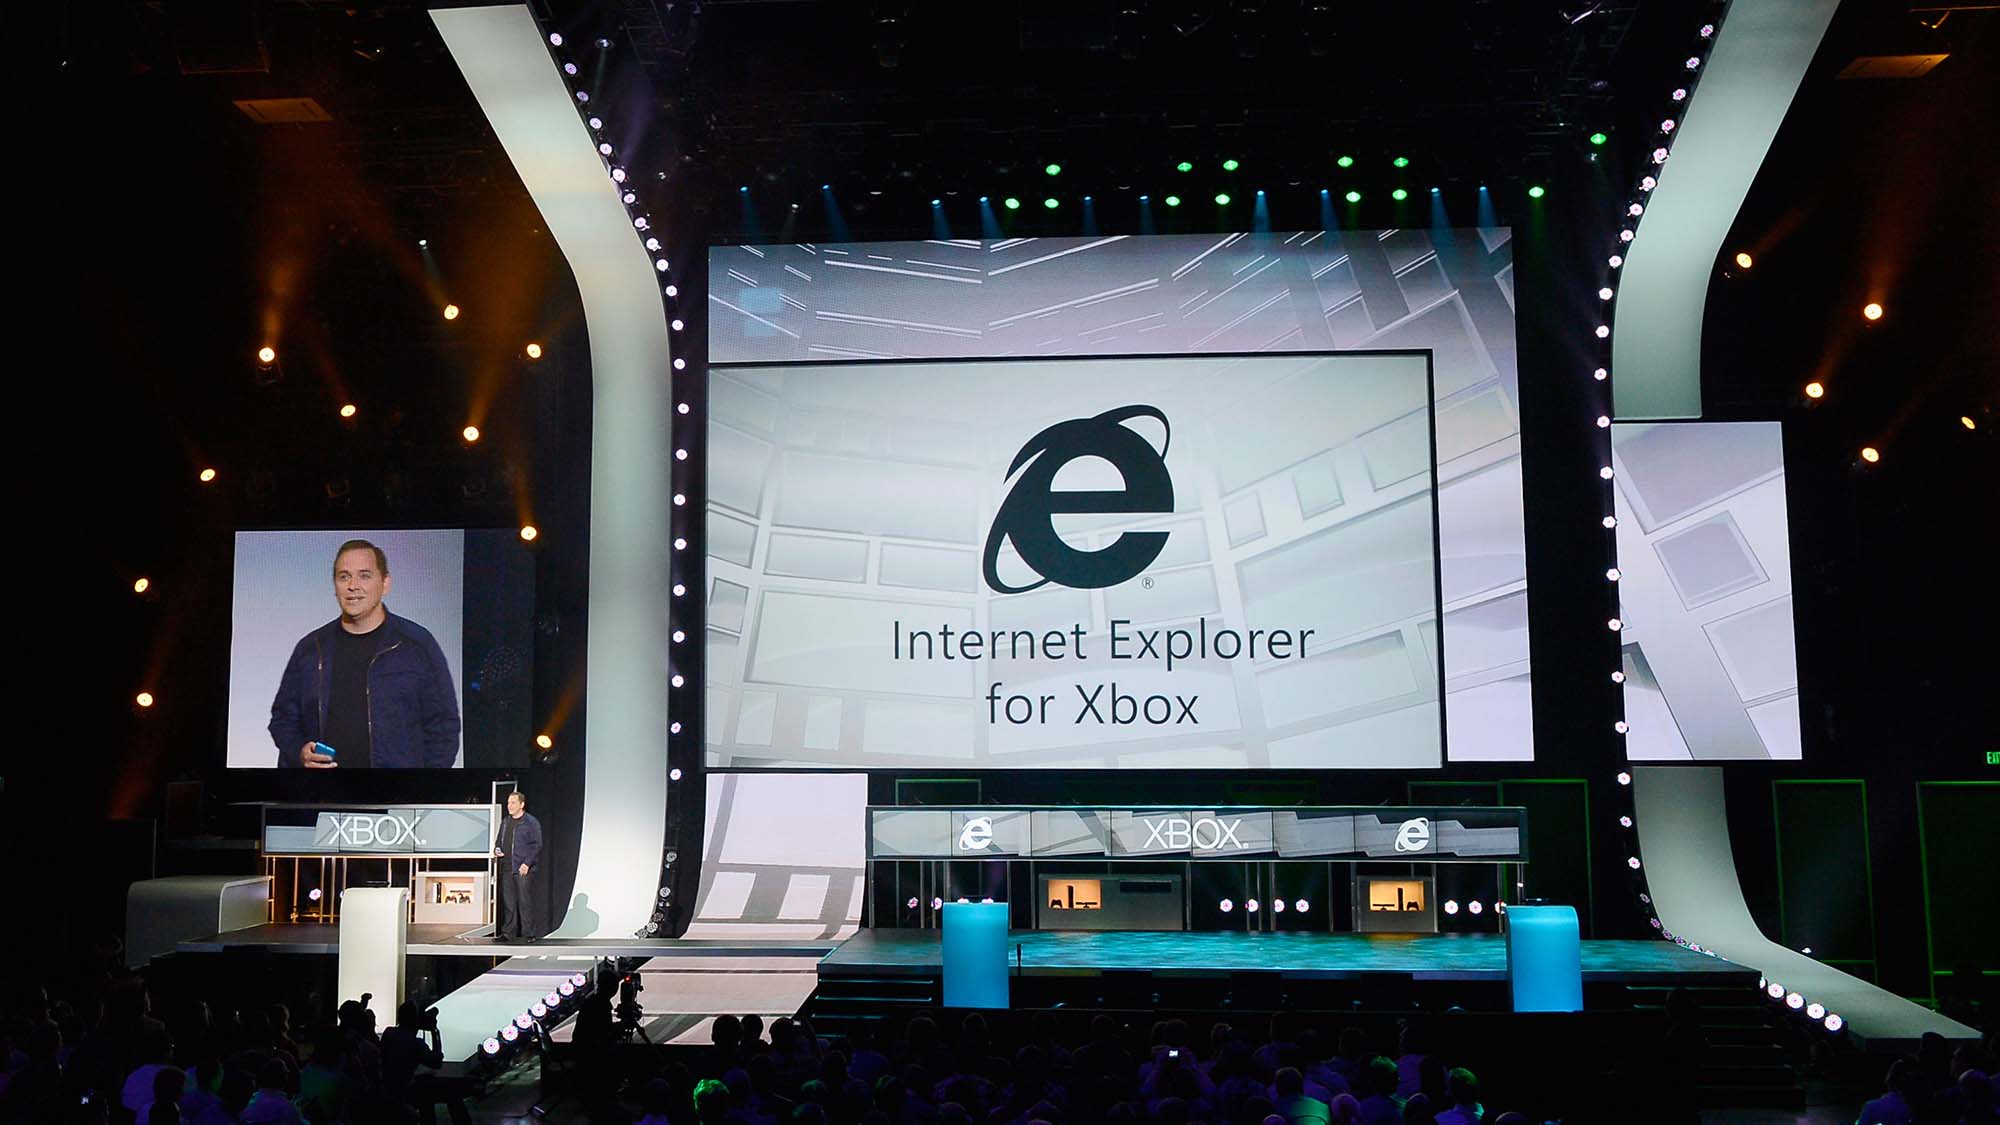 Xbox Live exec Marc Whitten introduces Internet Explorer for Xbox during Microsoft Xbox press conference at Electronic Entertainment Expo